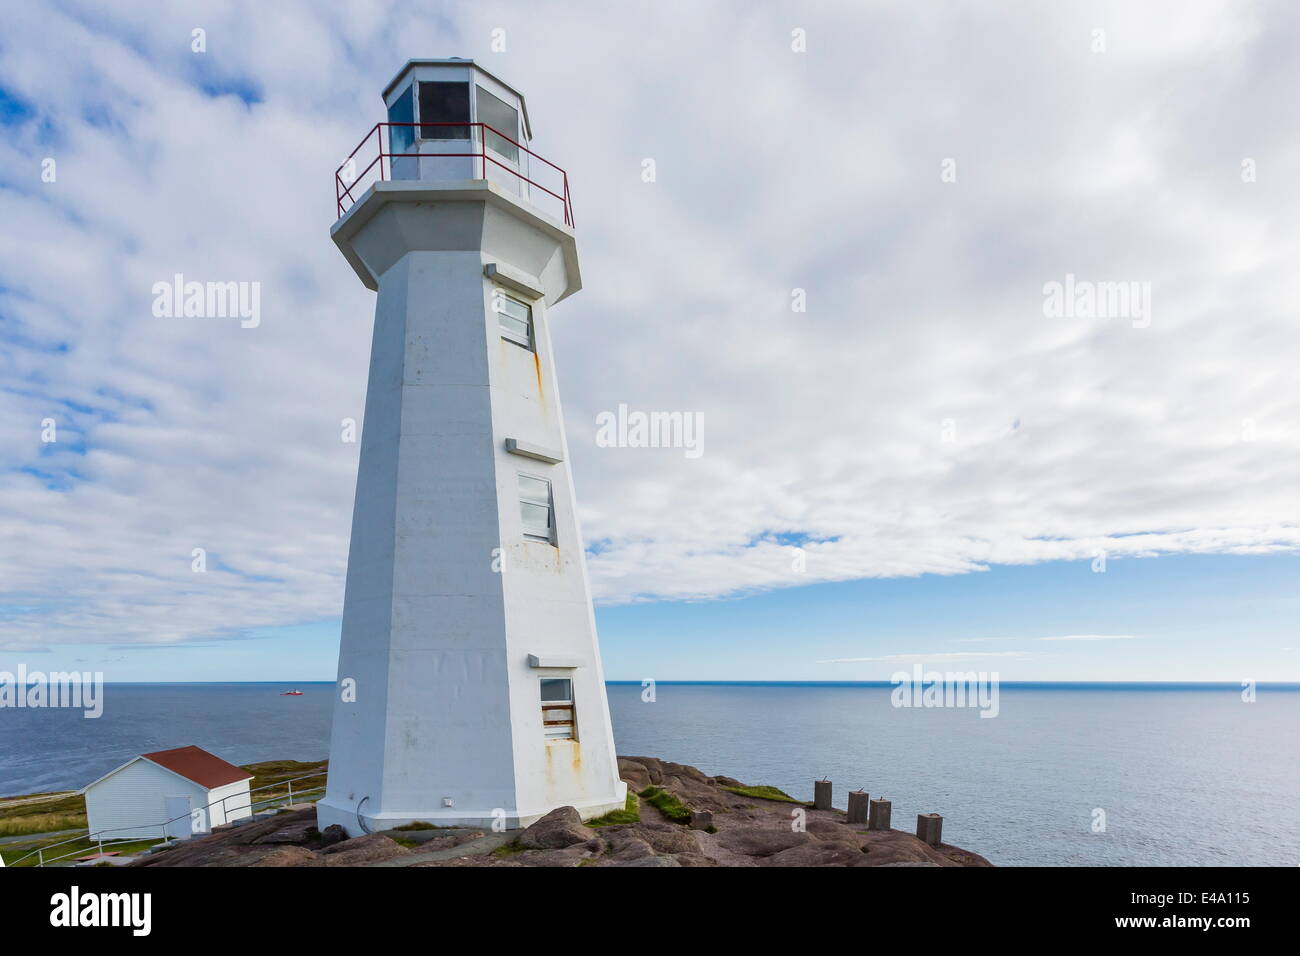 The lighthouse at Cape Spear National Historic Site, St. John's, Newfoundland, Canada, North America Stock Photo